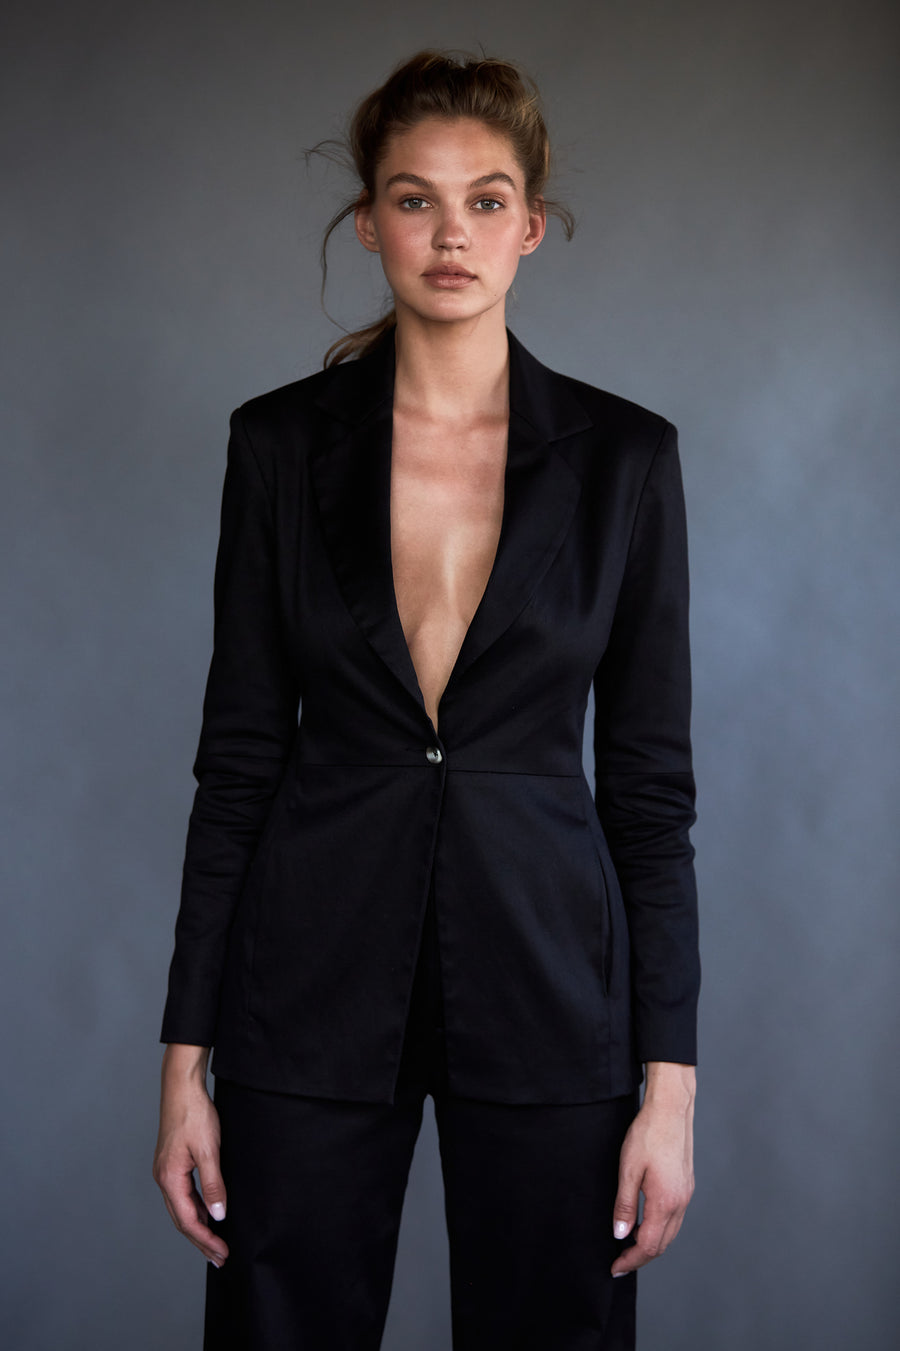 FITTED BLAZER WITH SEAM DETAIL